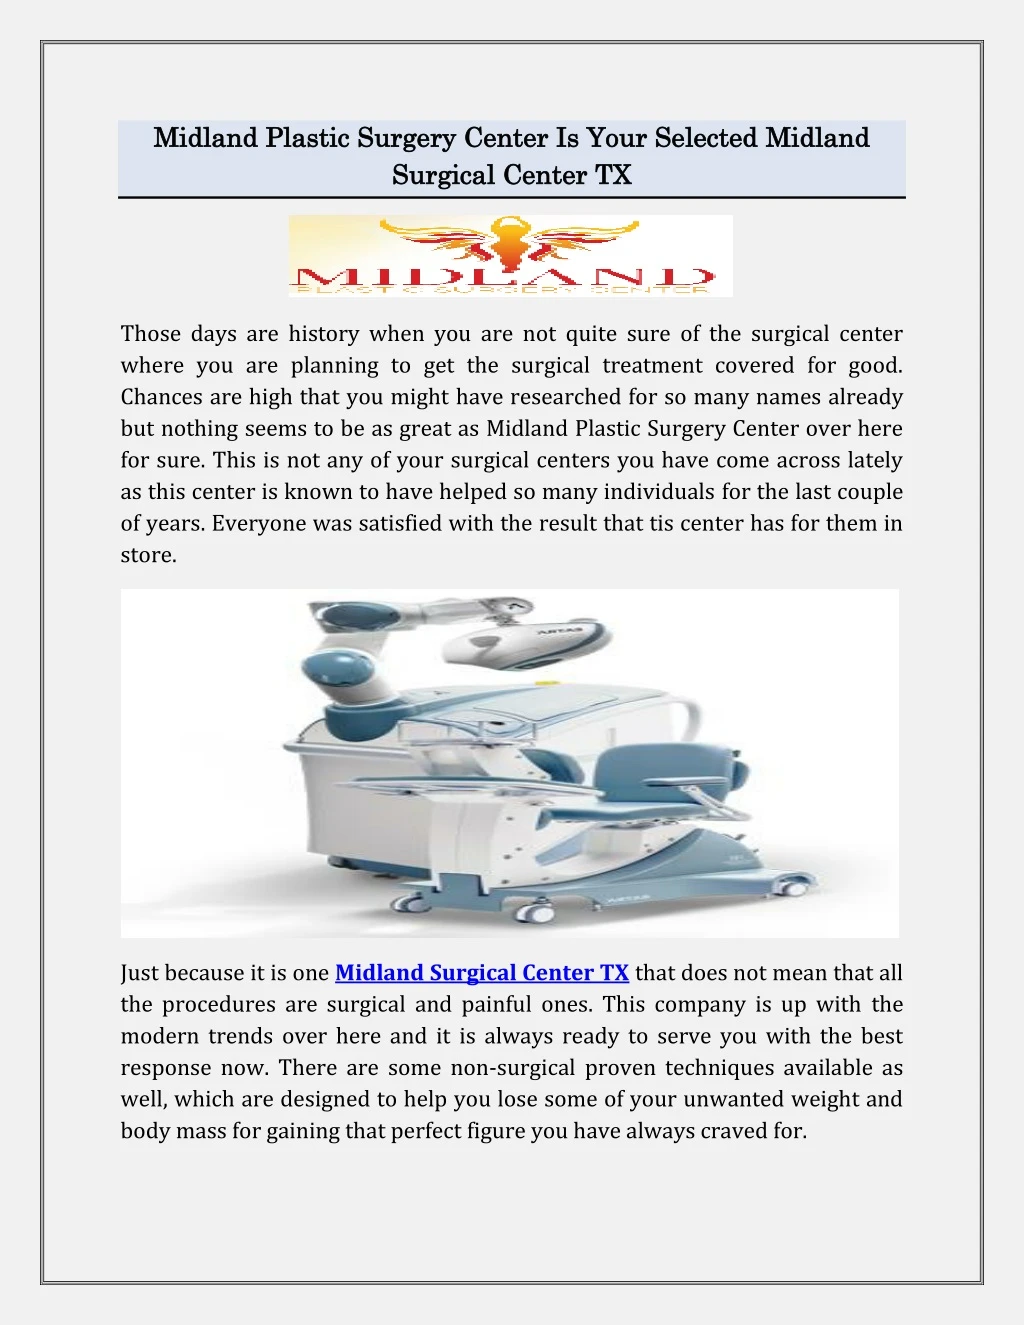 midland plastic surgery center is your selected